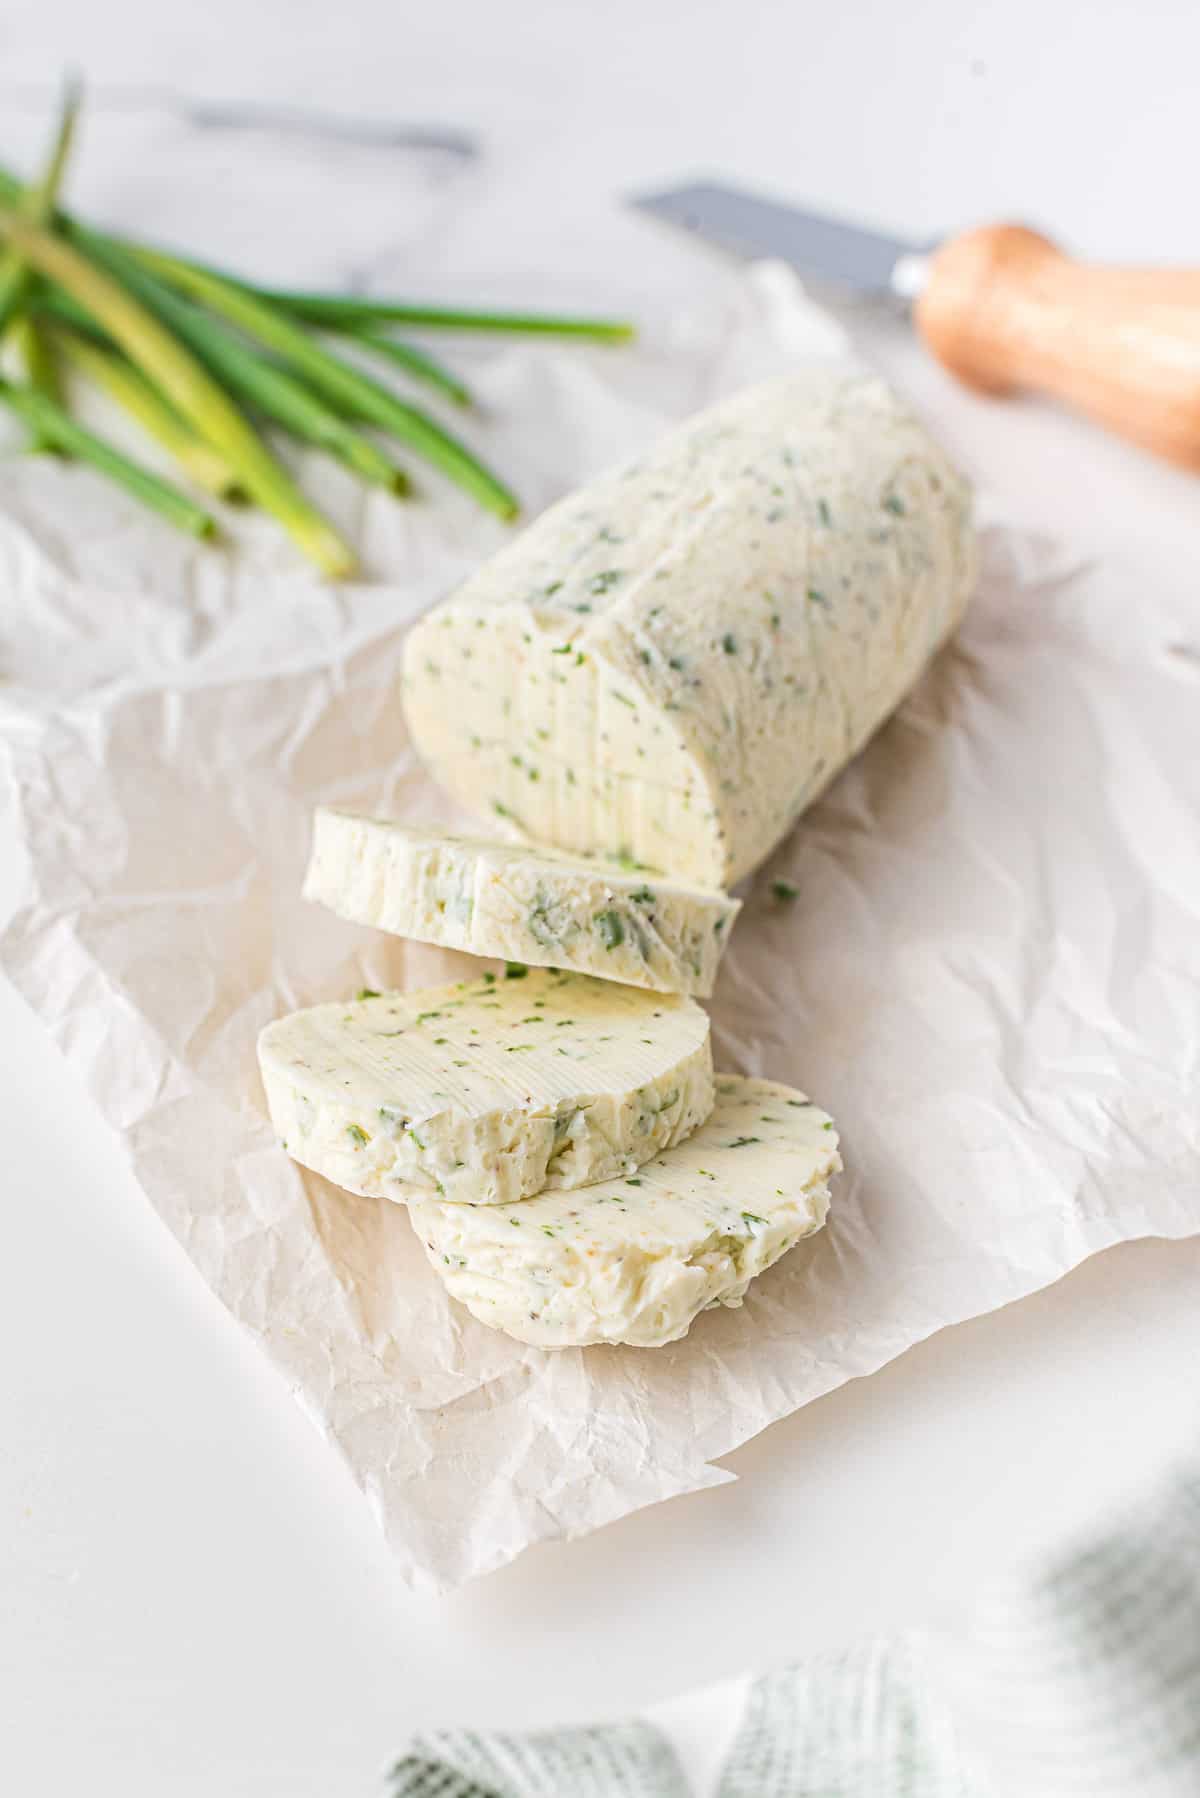 Large log of chive butter, with three slices cut off.